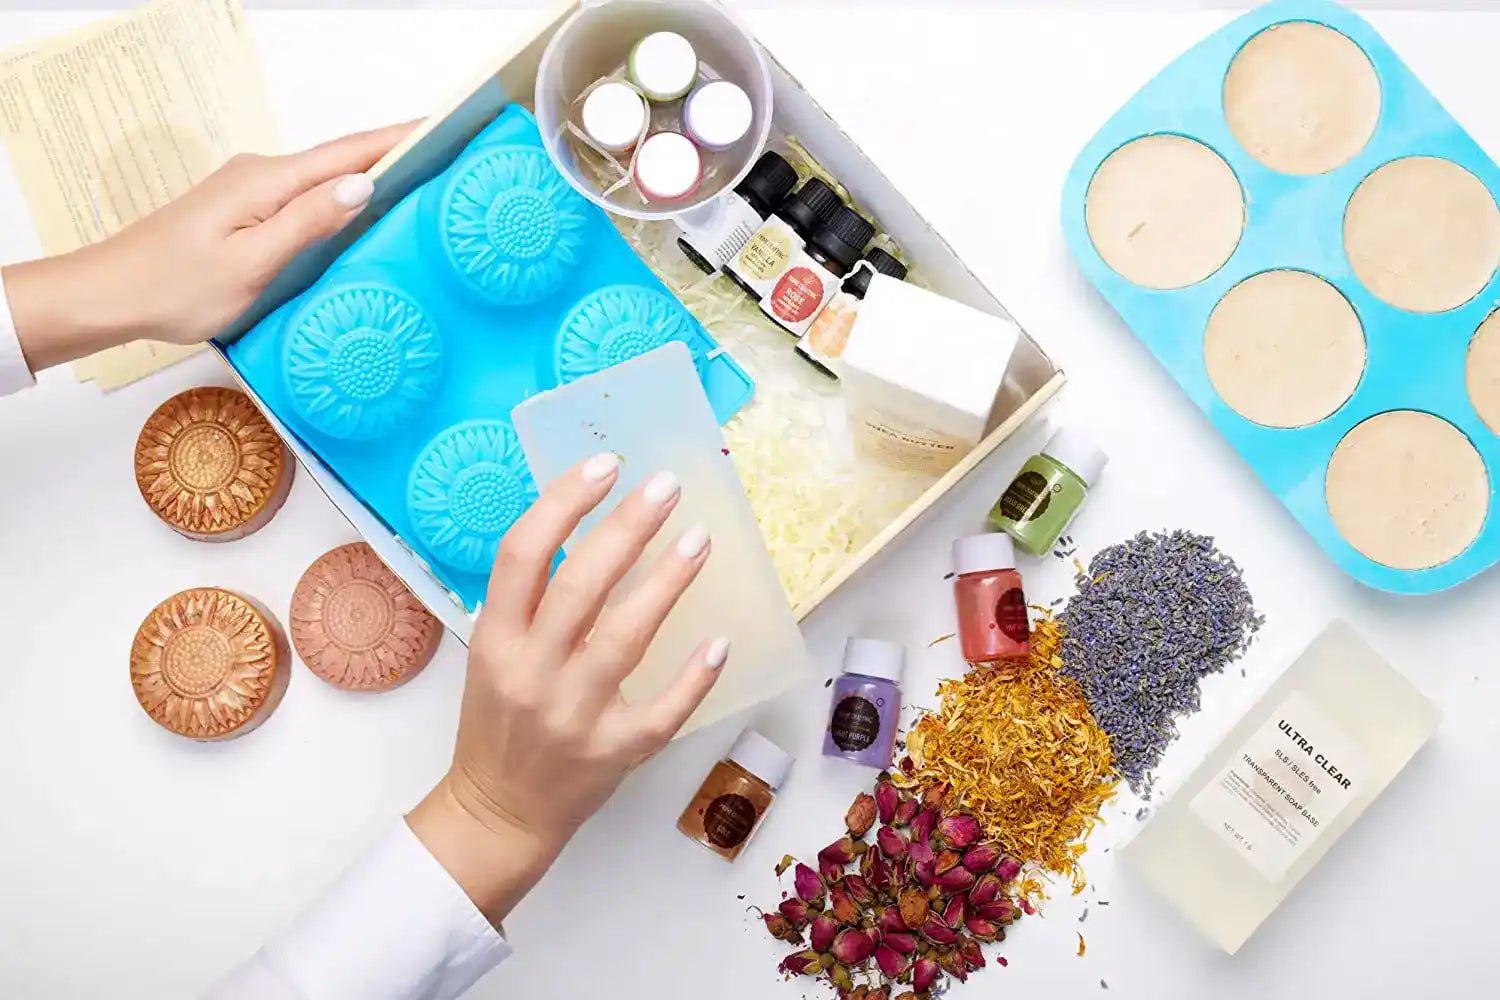 The 5 Best Soap-Making Kits for Beginners, According to Experts